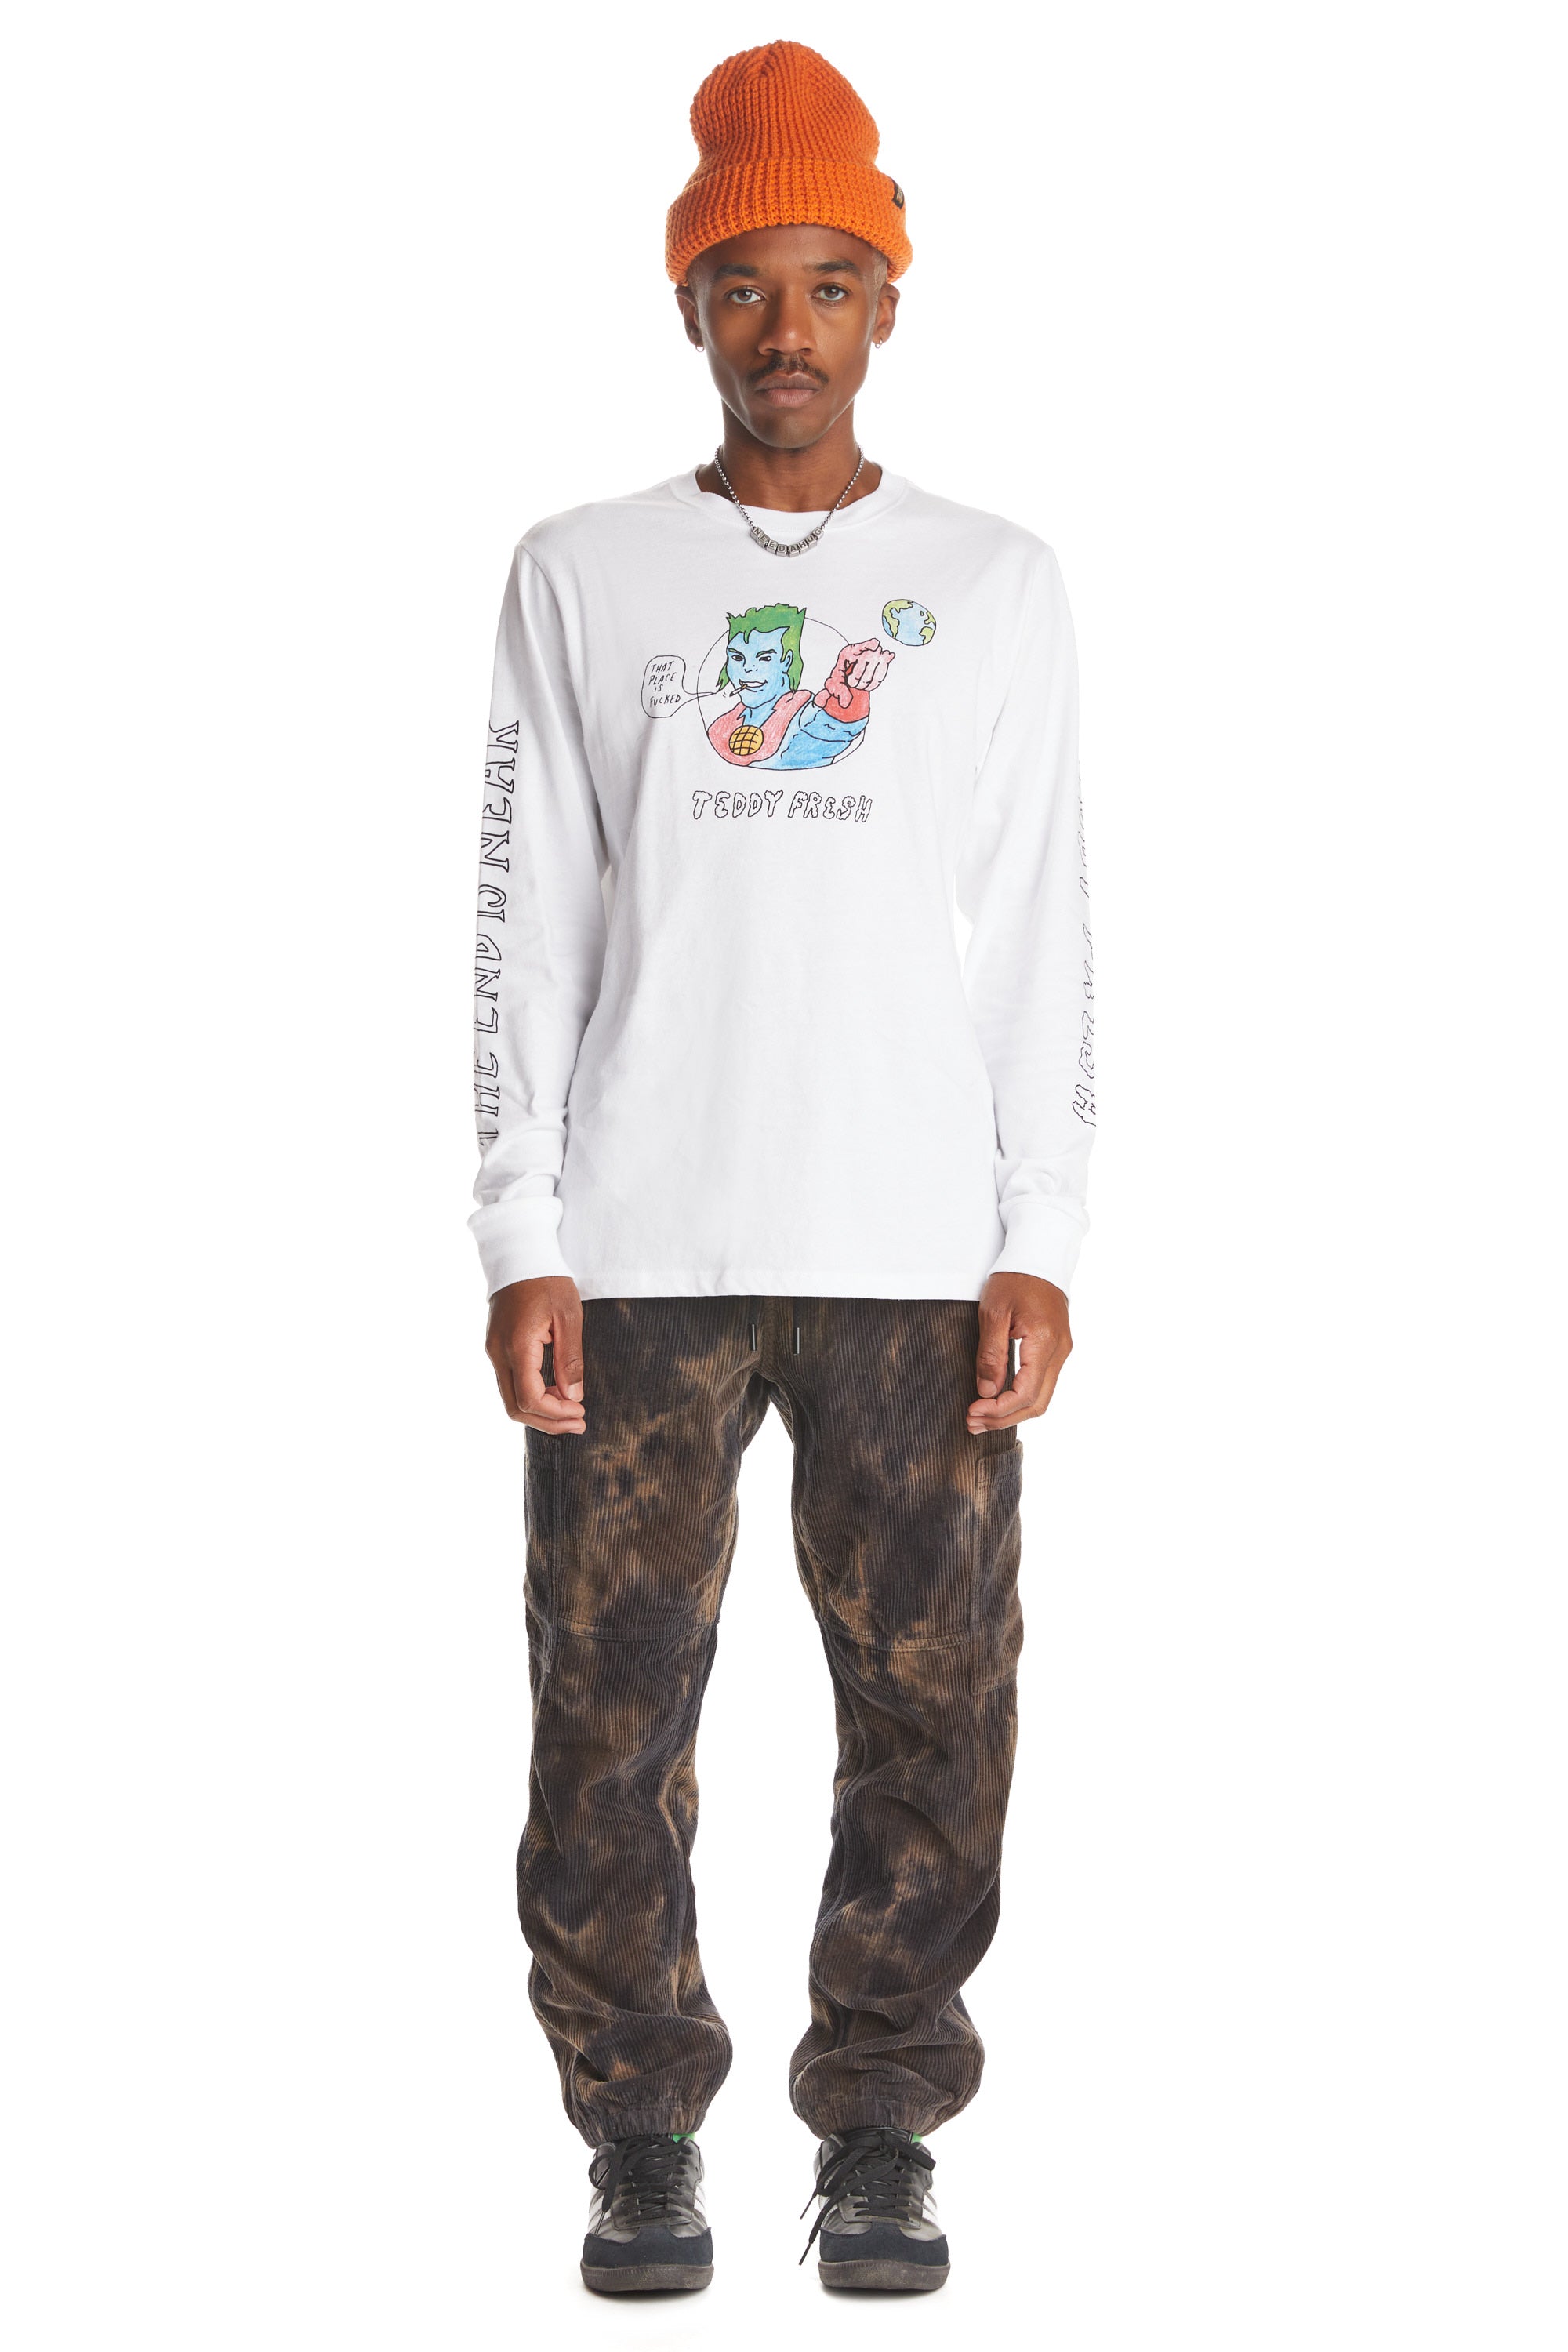 Teddy Fresh on X: Flower Denim Overalls on our site now